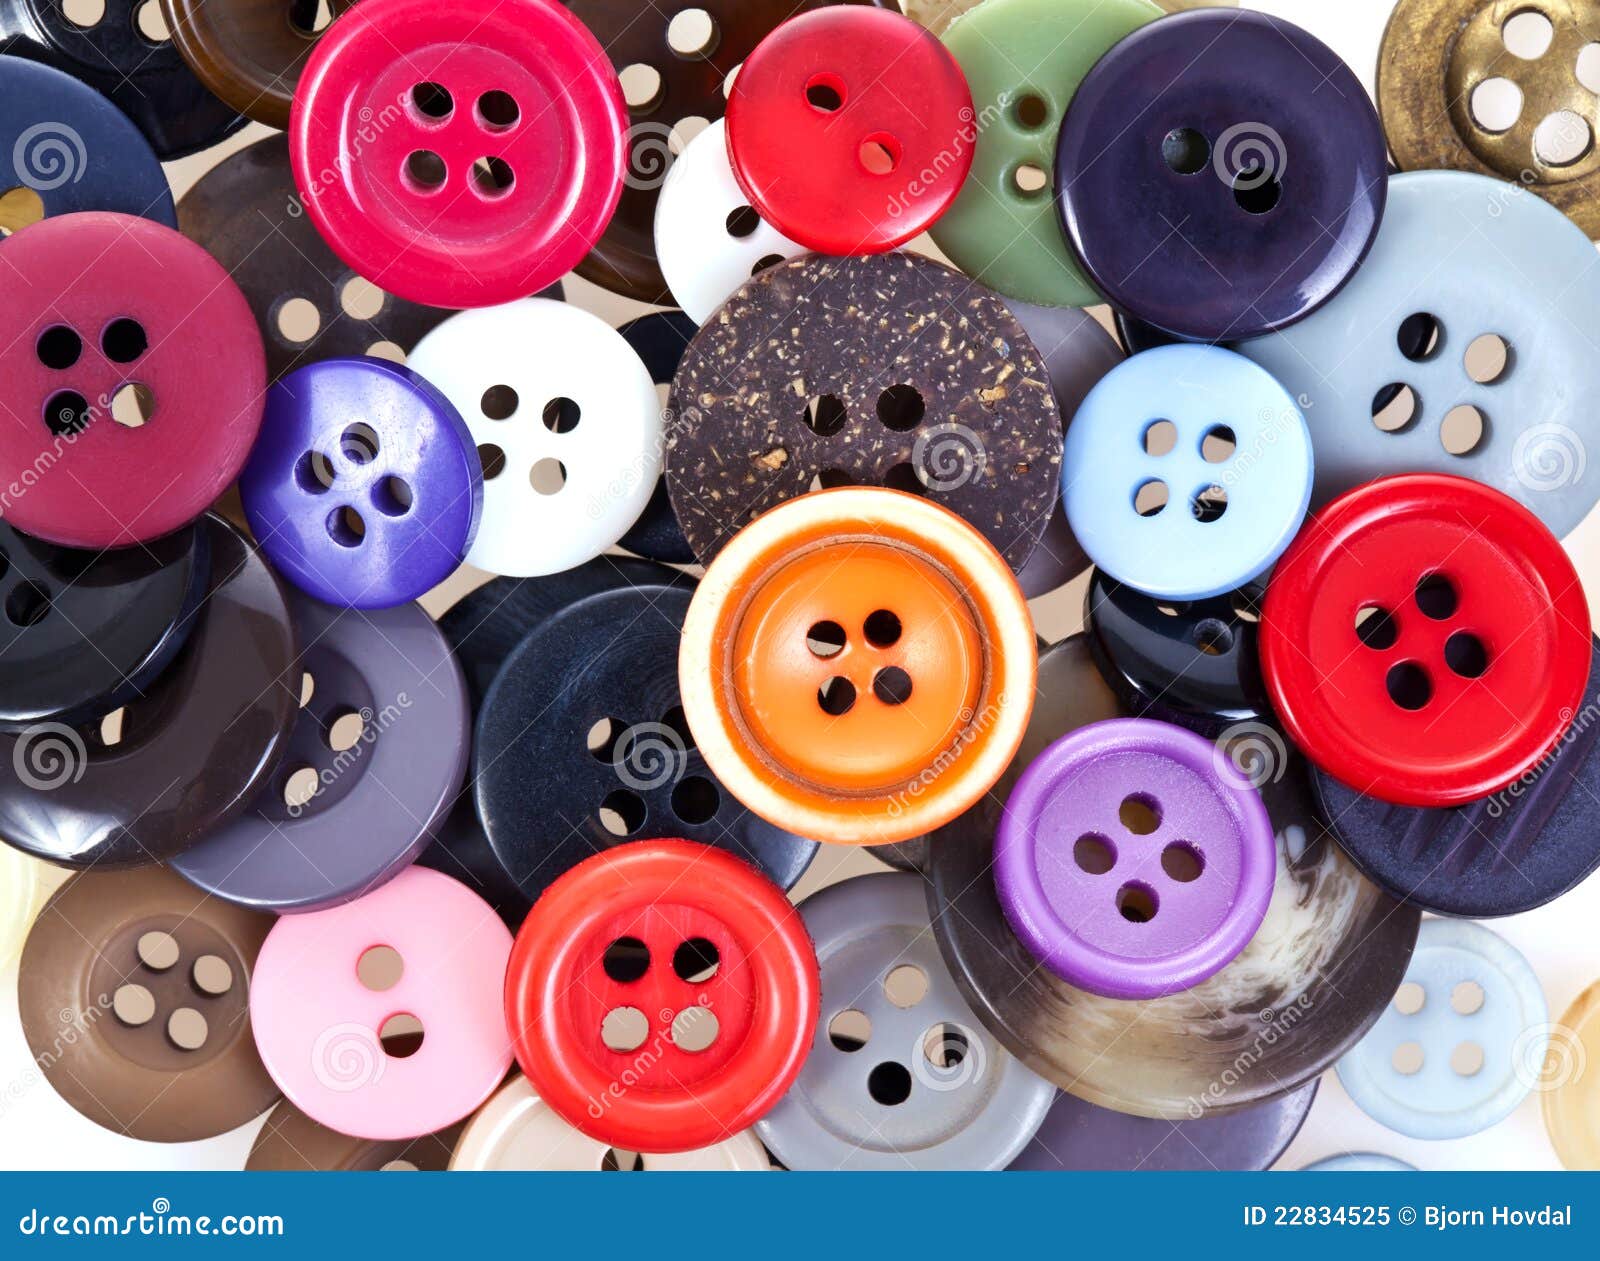 A pile of colorful buttons on a white surface. Buttons colored